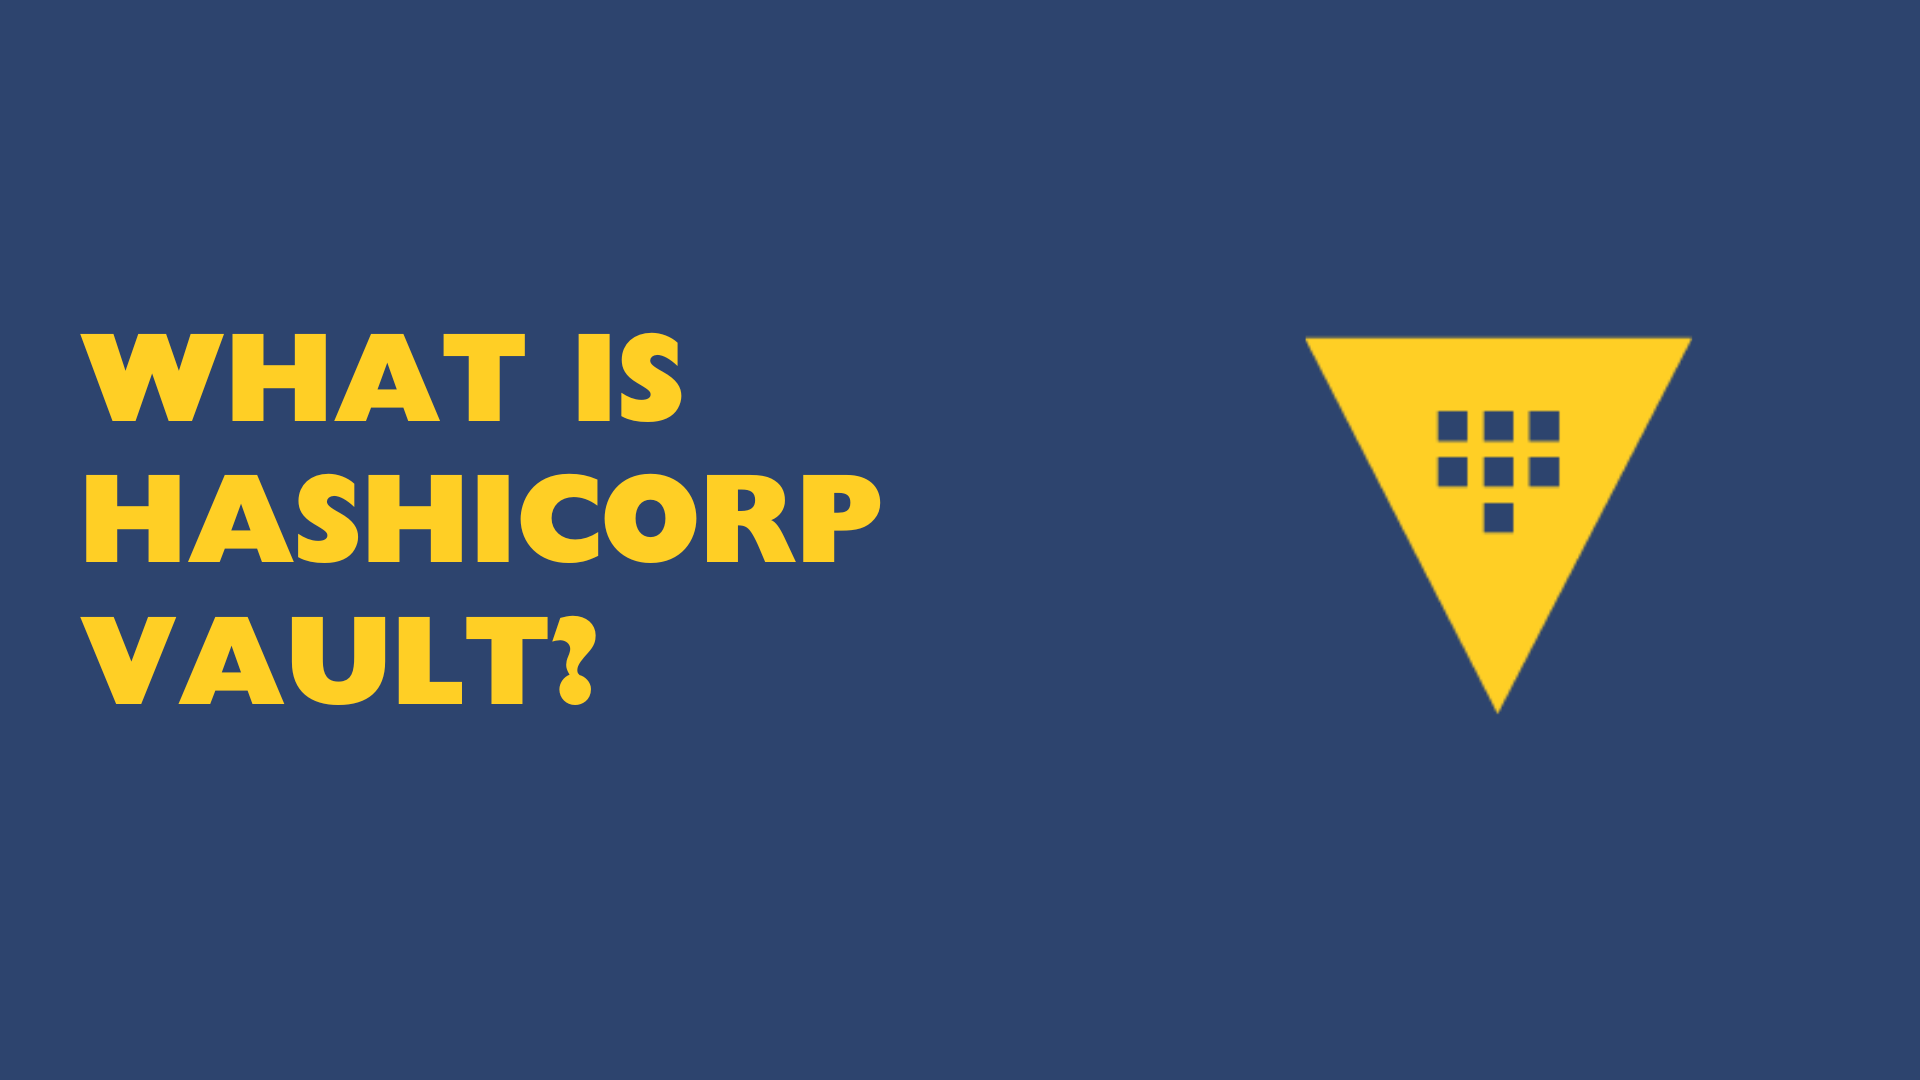 What is HashiCorp Vault?